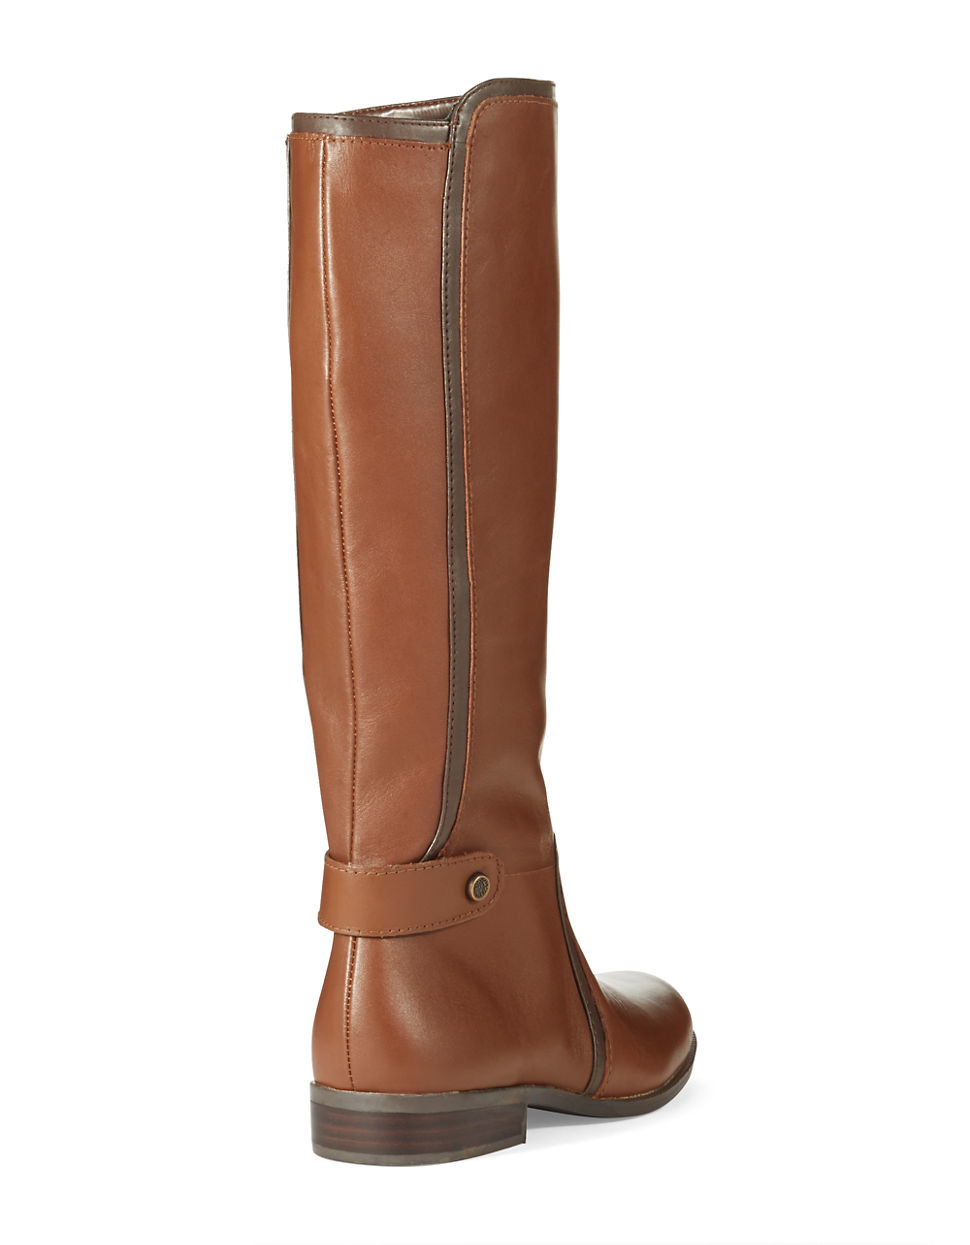 Anne klein Cybele Leather Riding Boots in Brown | Lyst